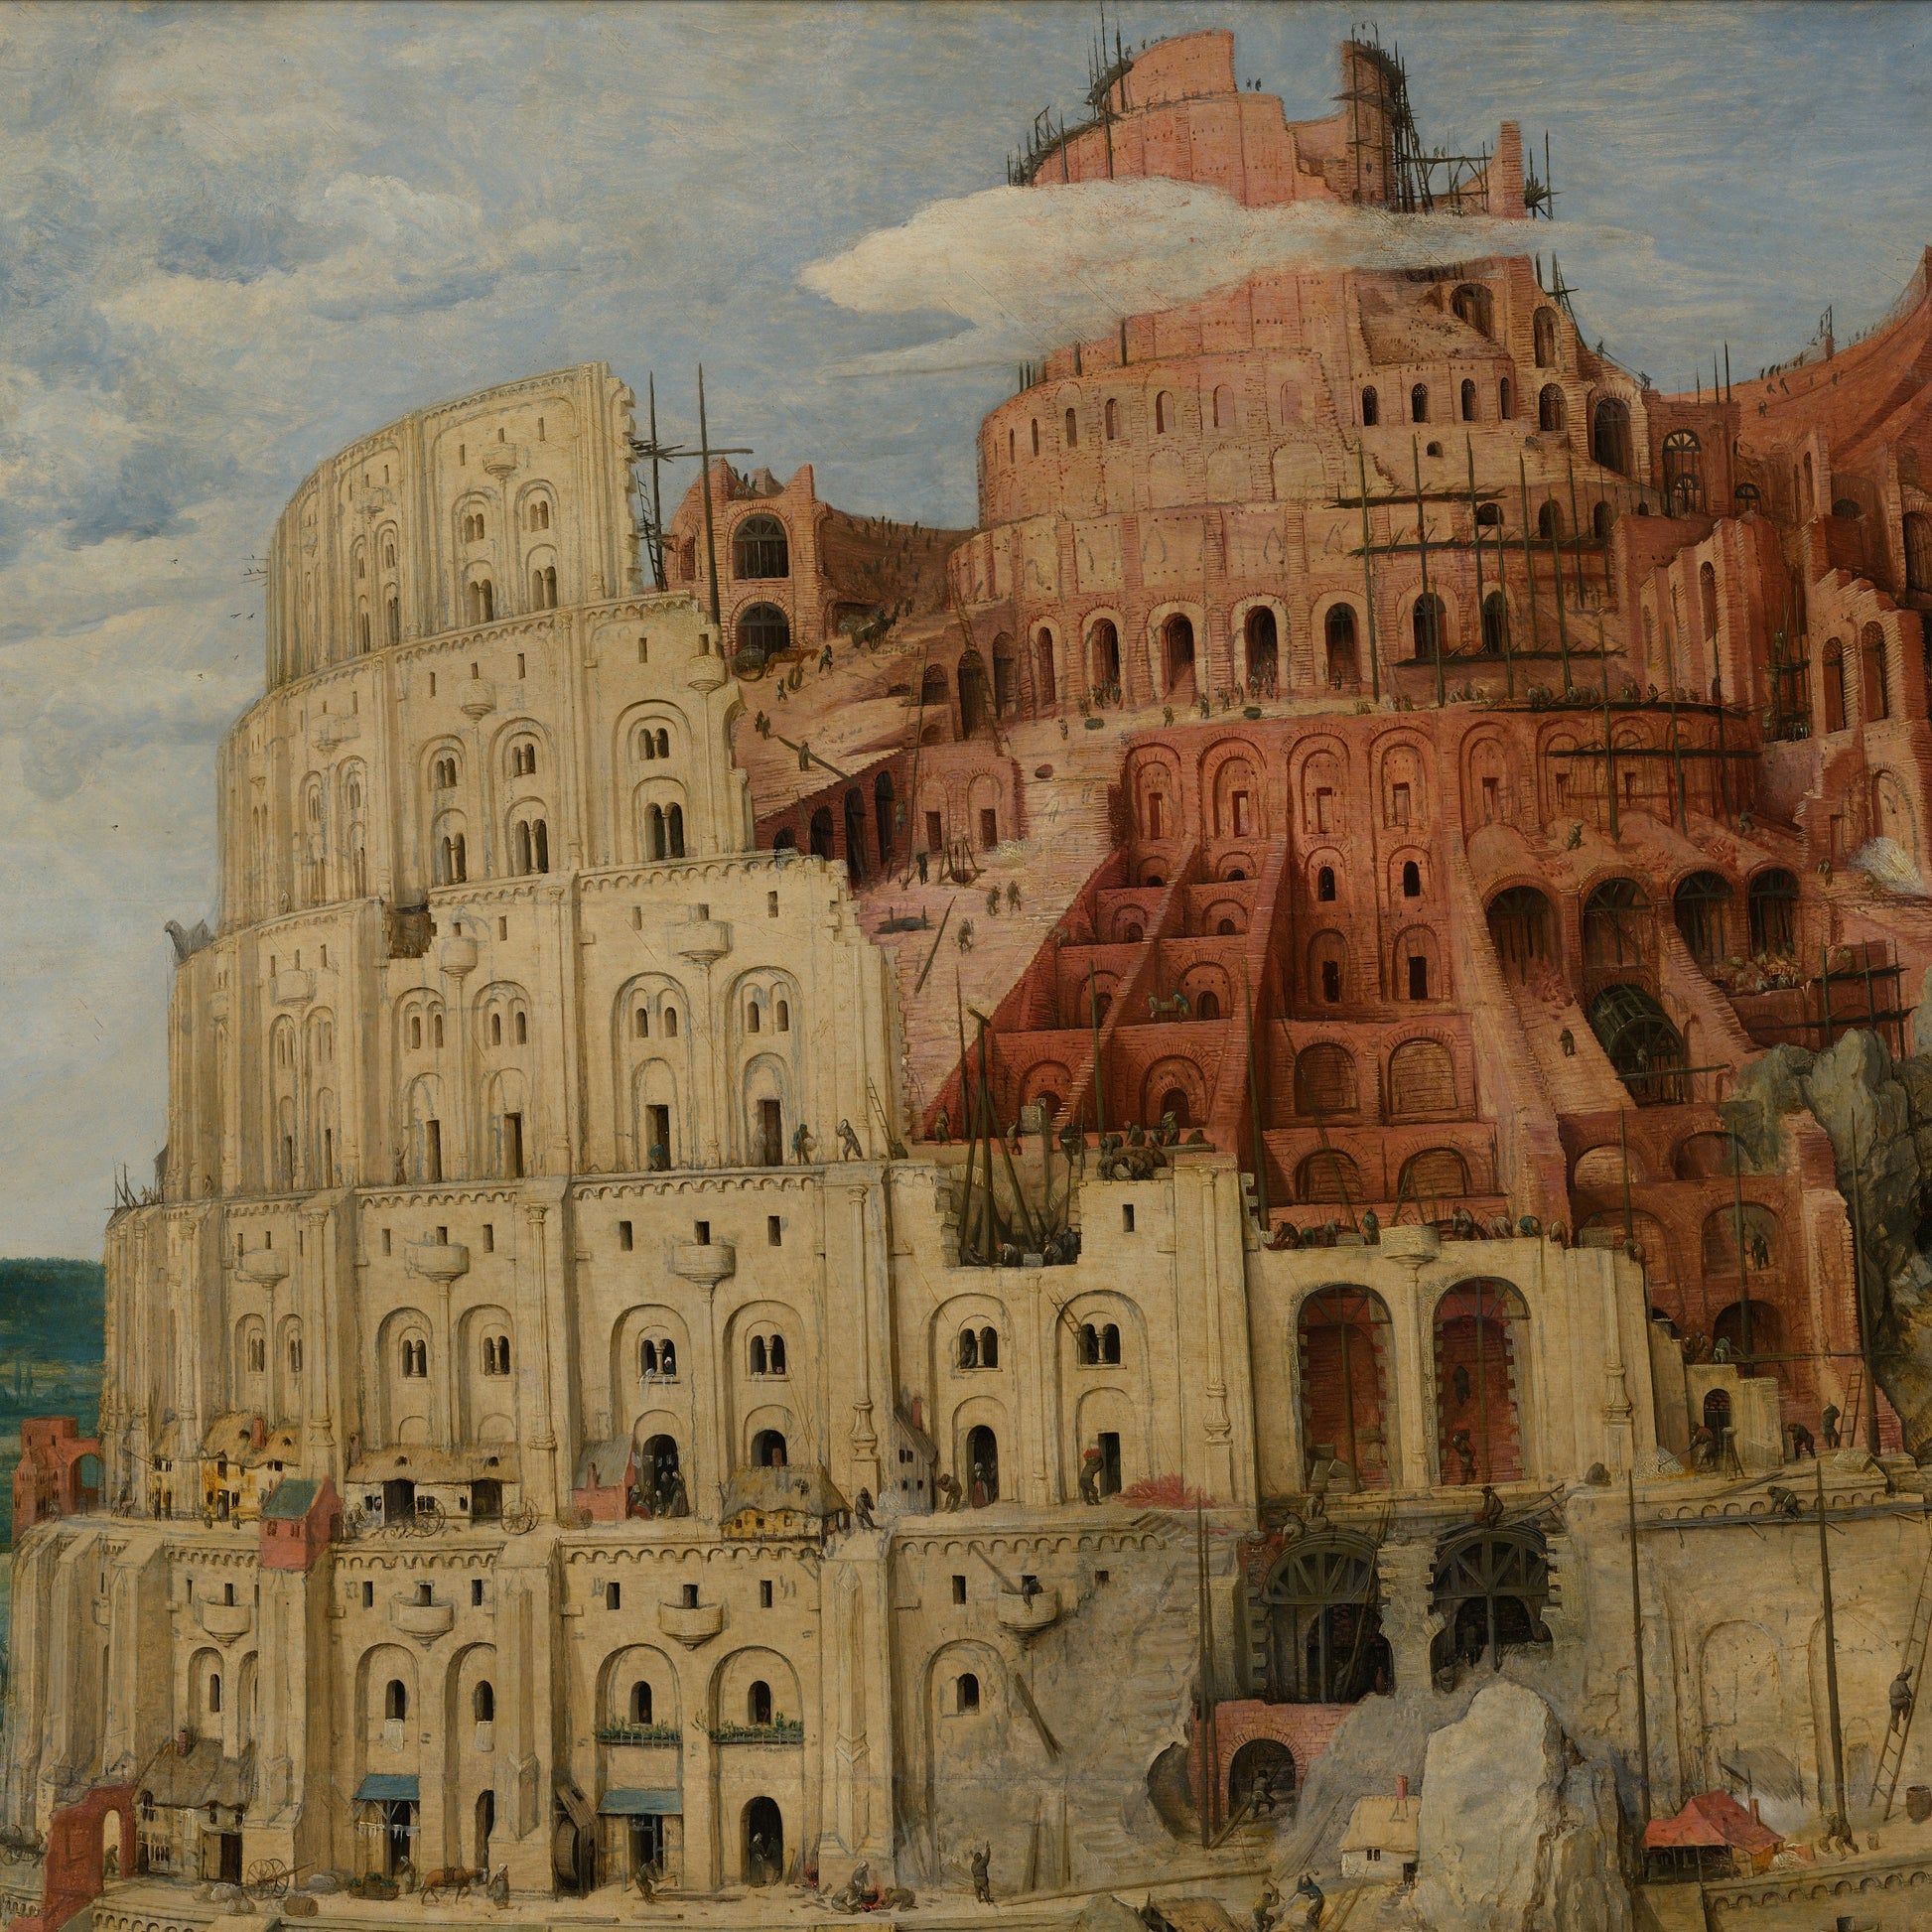 The Tower of Babel by Pieter Bruegel, 3d Printed with texture and brush strokes looks like original oil-painting, code:080